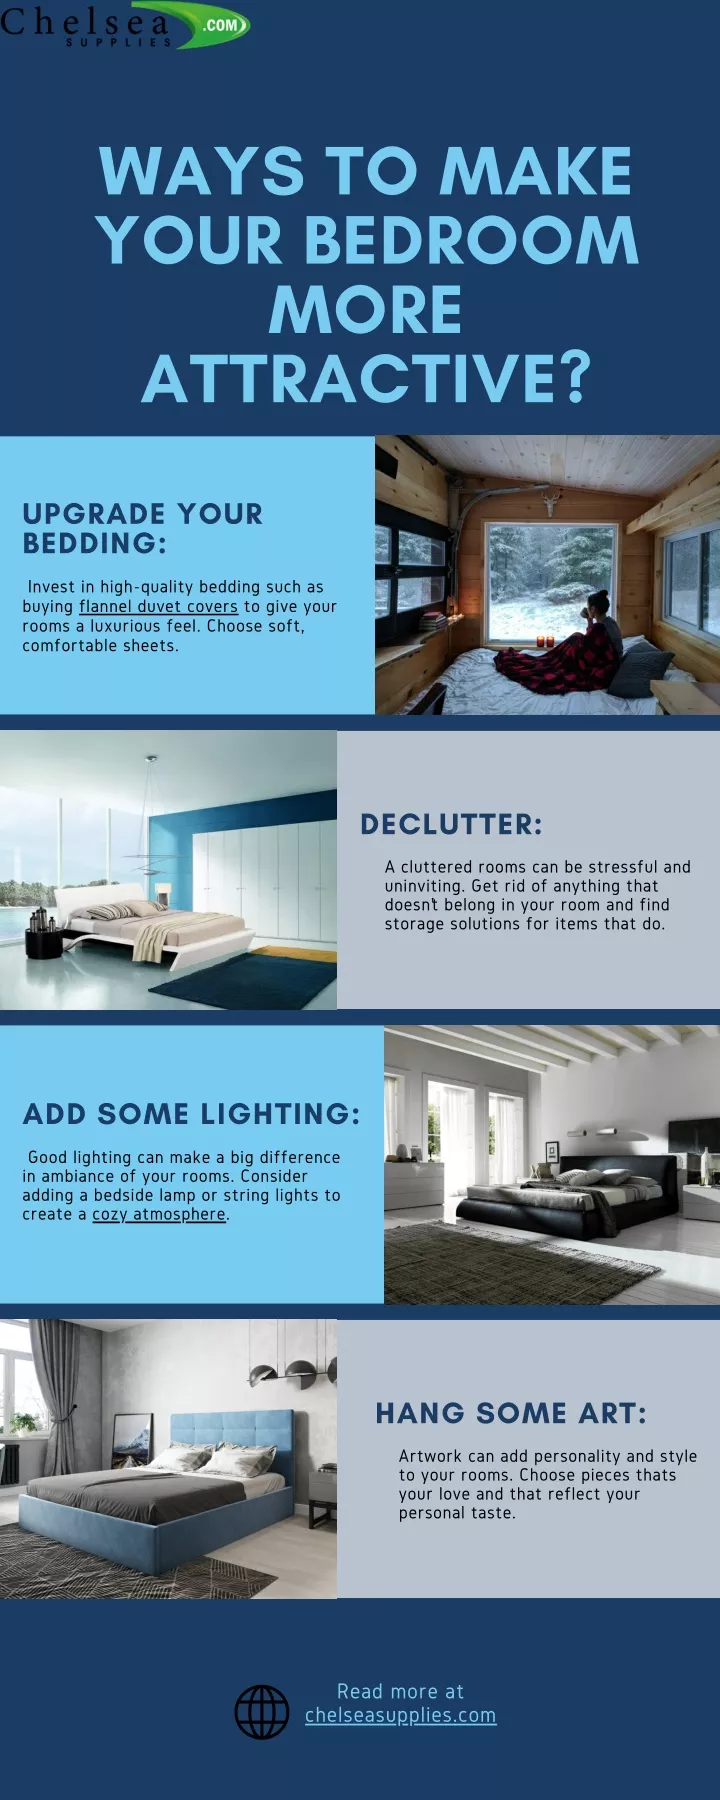 ways to make your bedroom more attractive